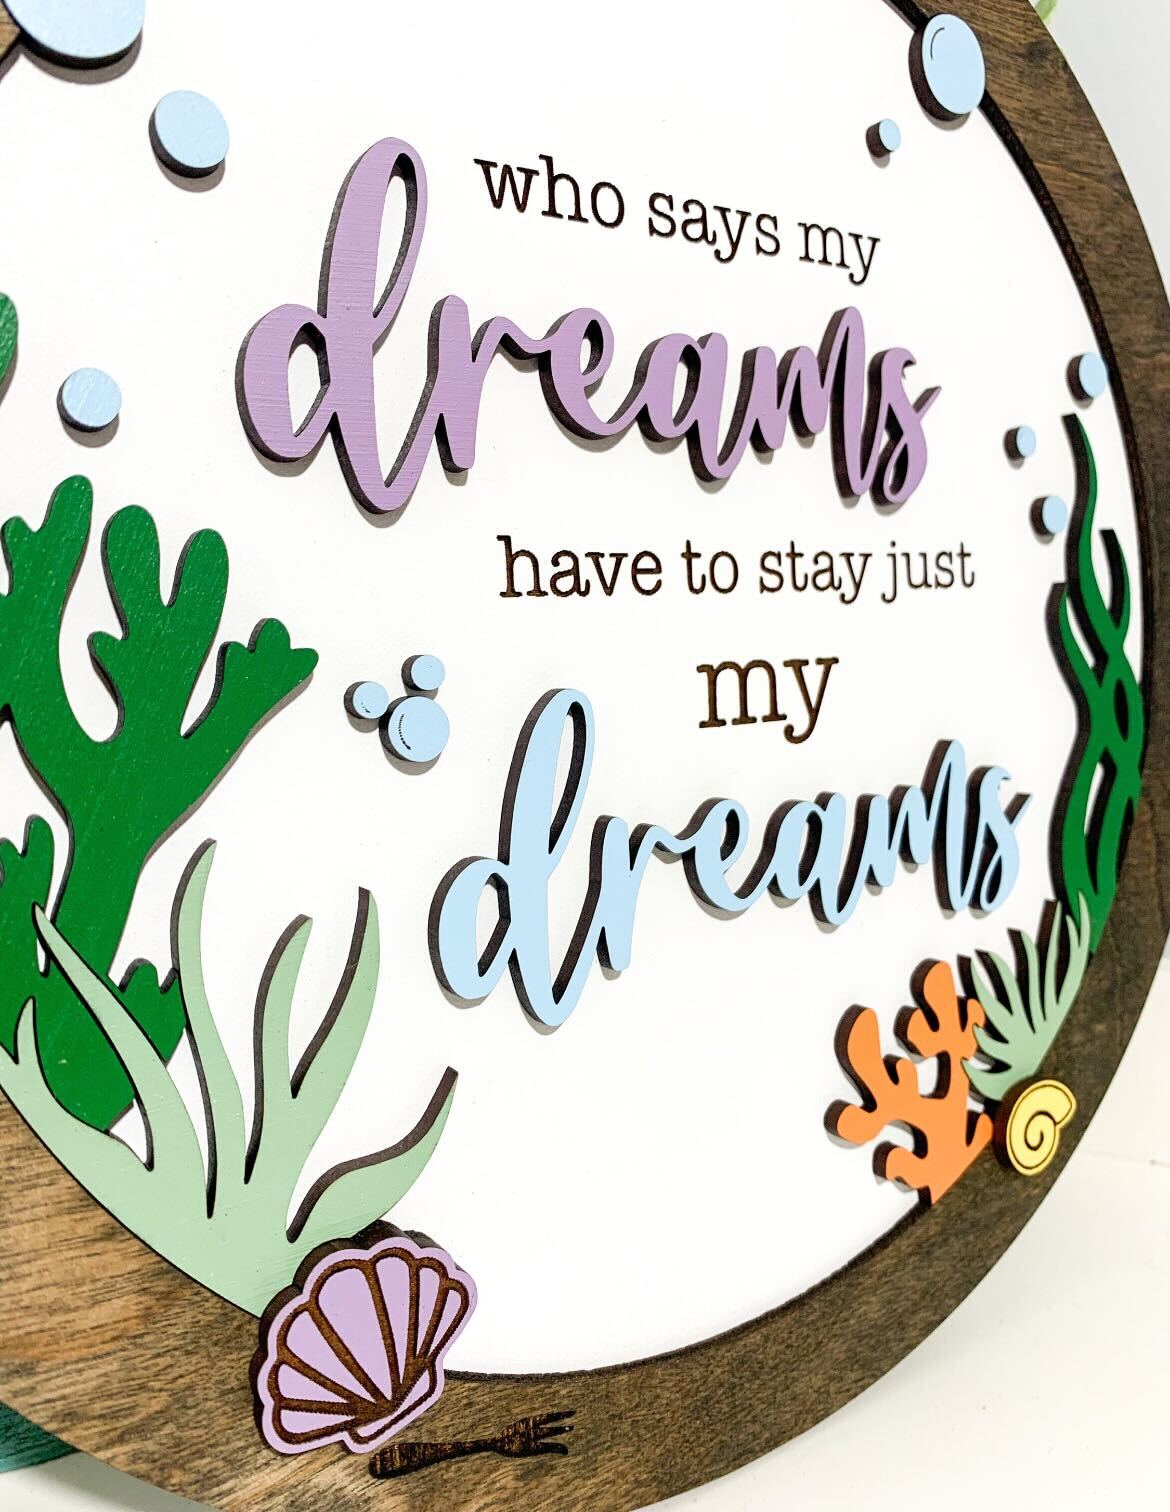 Who Say My Dreams 10" Wooden Sign